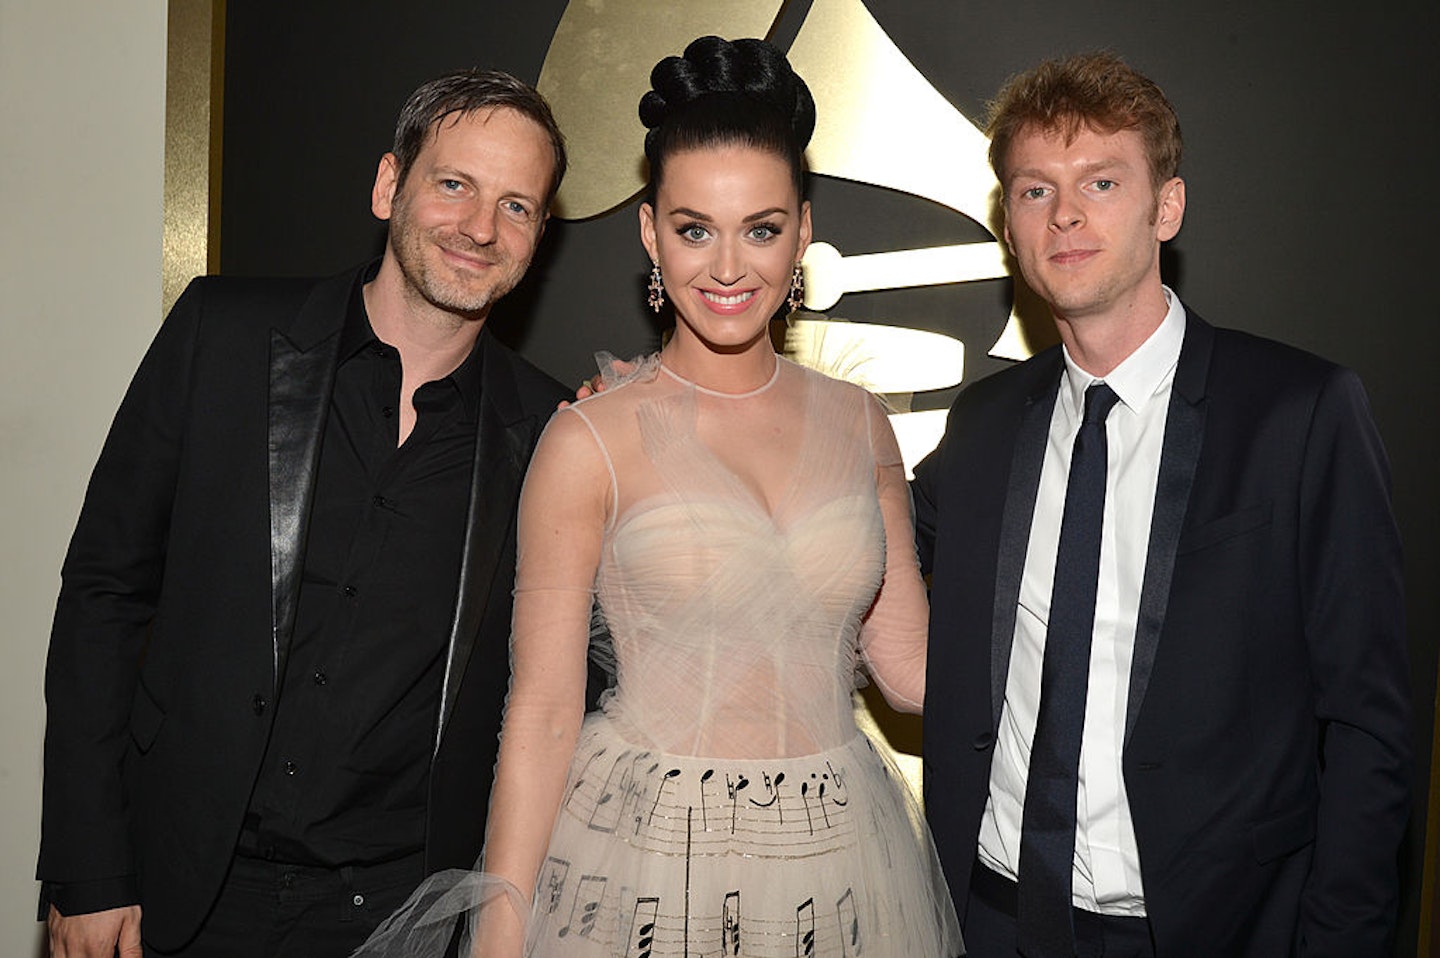 Producer Dr. Luke, singer Katy Perry and producer Cirkut attend the 56th GRAMMY Awards in 2014